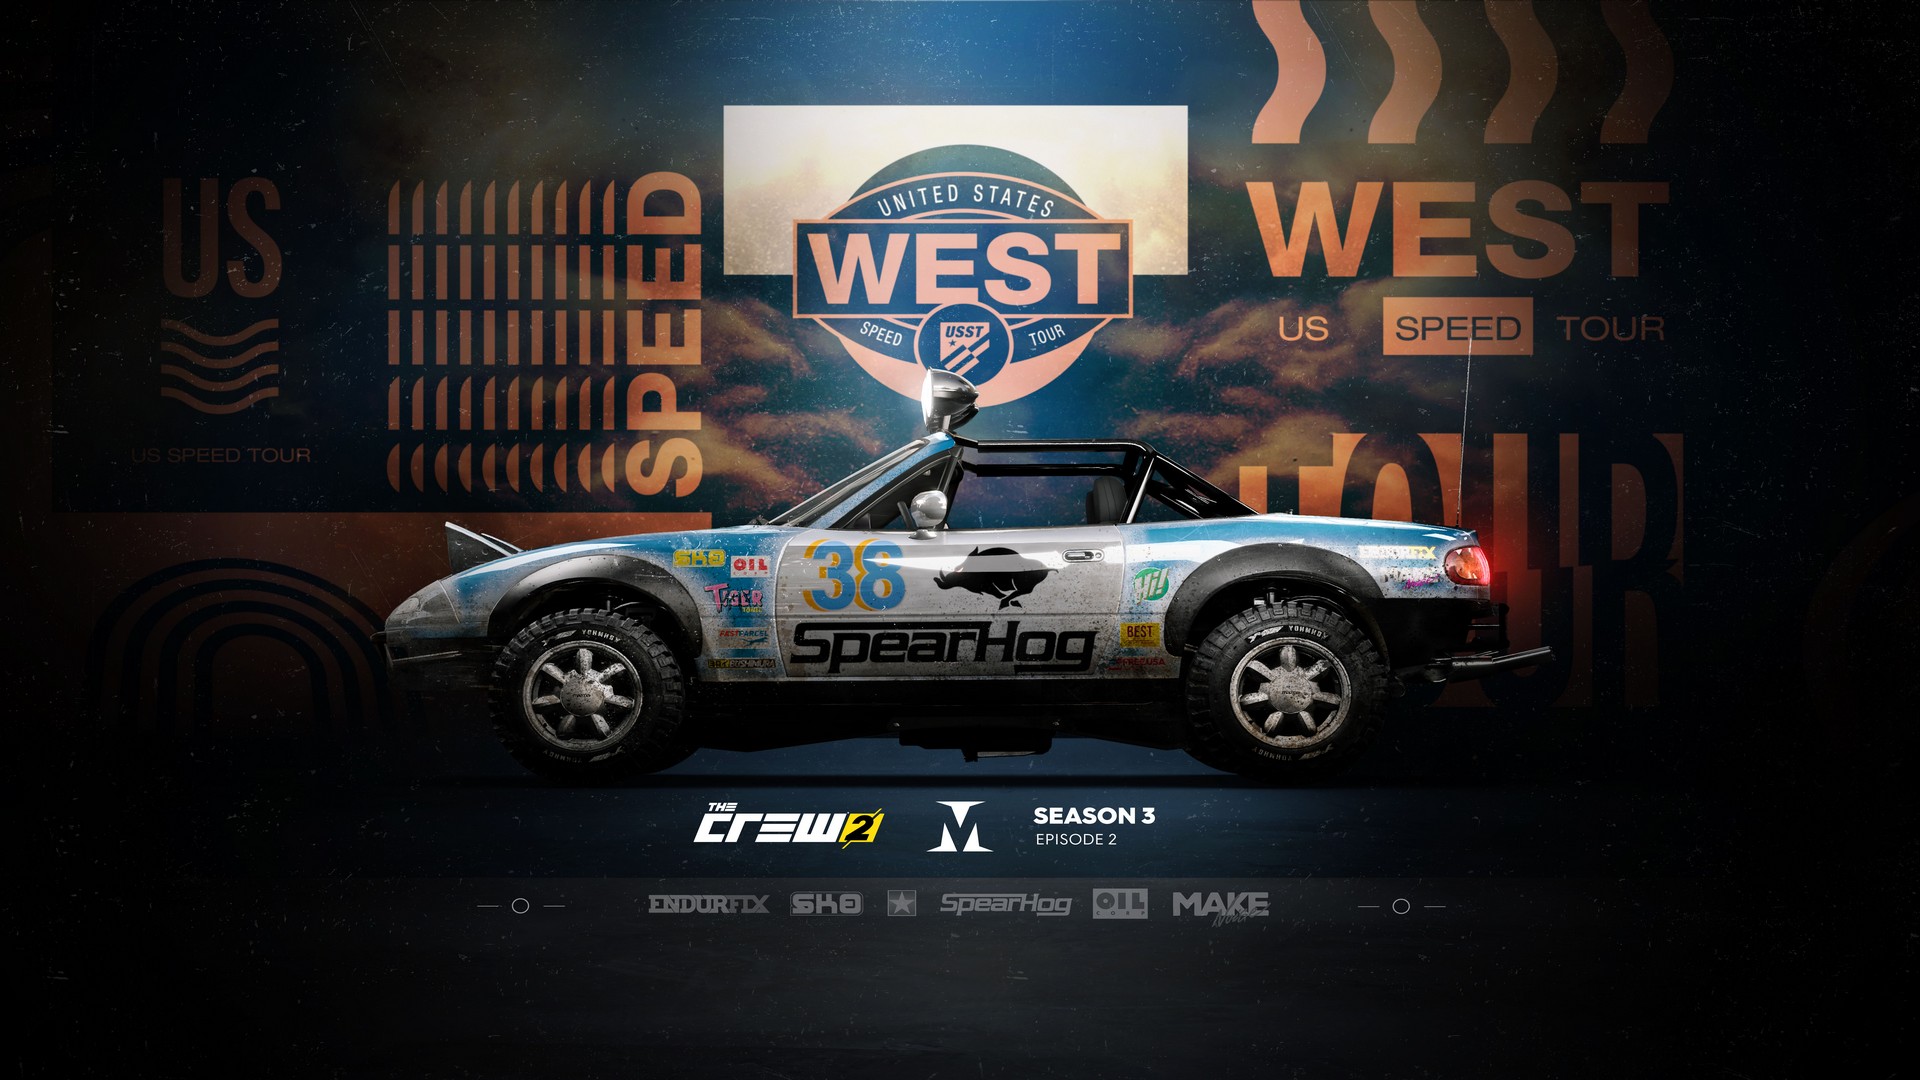 2 US Update Season Via Free The Gaming Three Tour West, Ubisoft\'s | Two: Speed Crew Available Episode MKAU